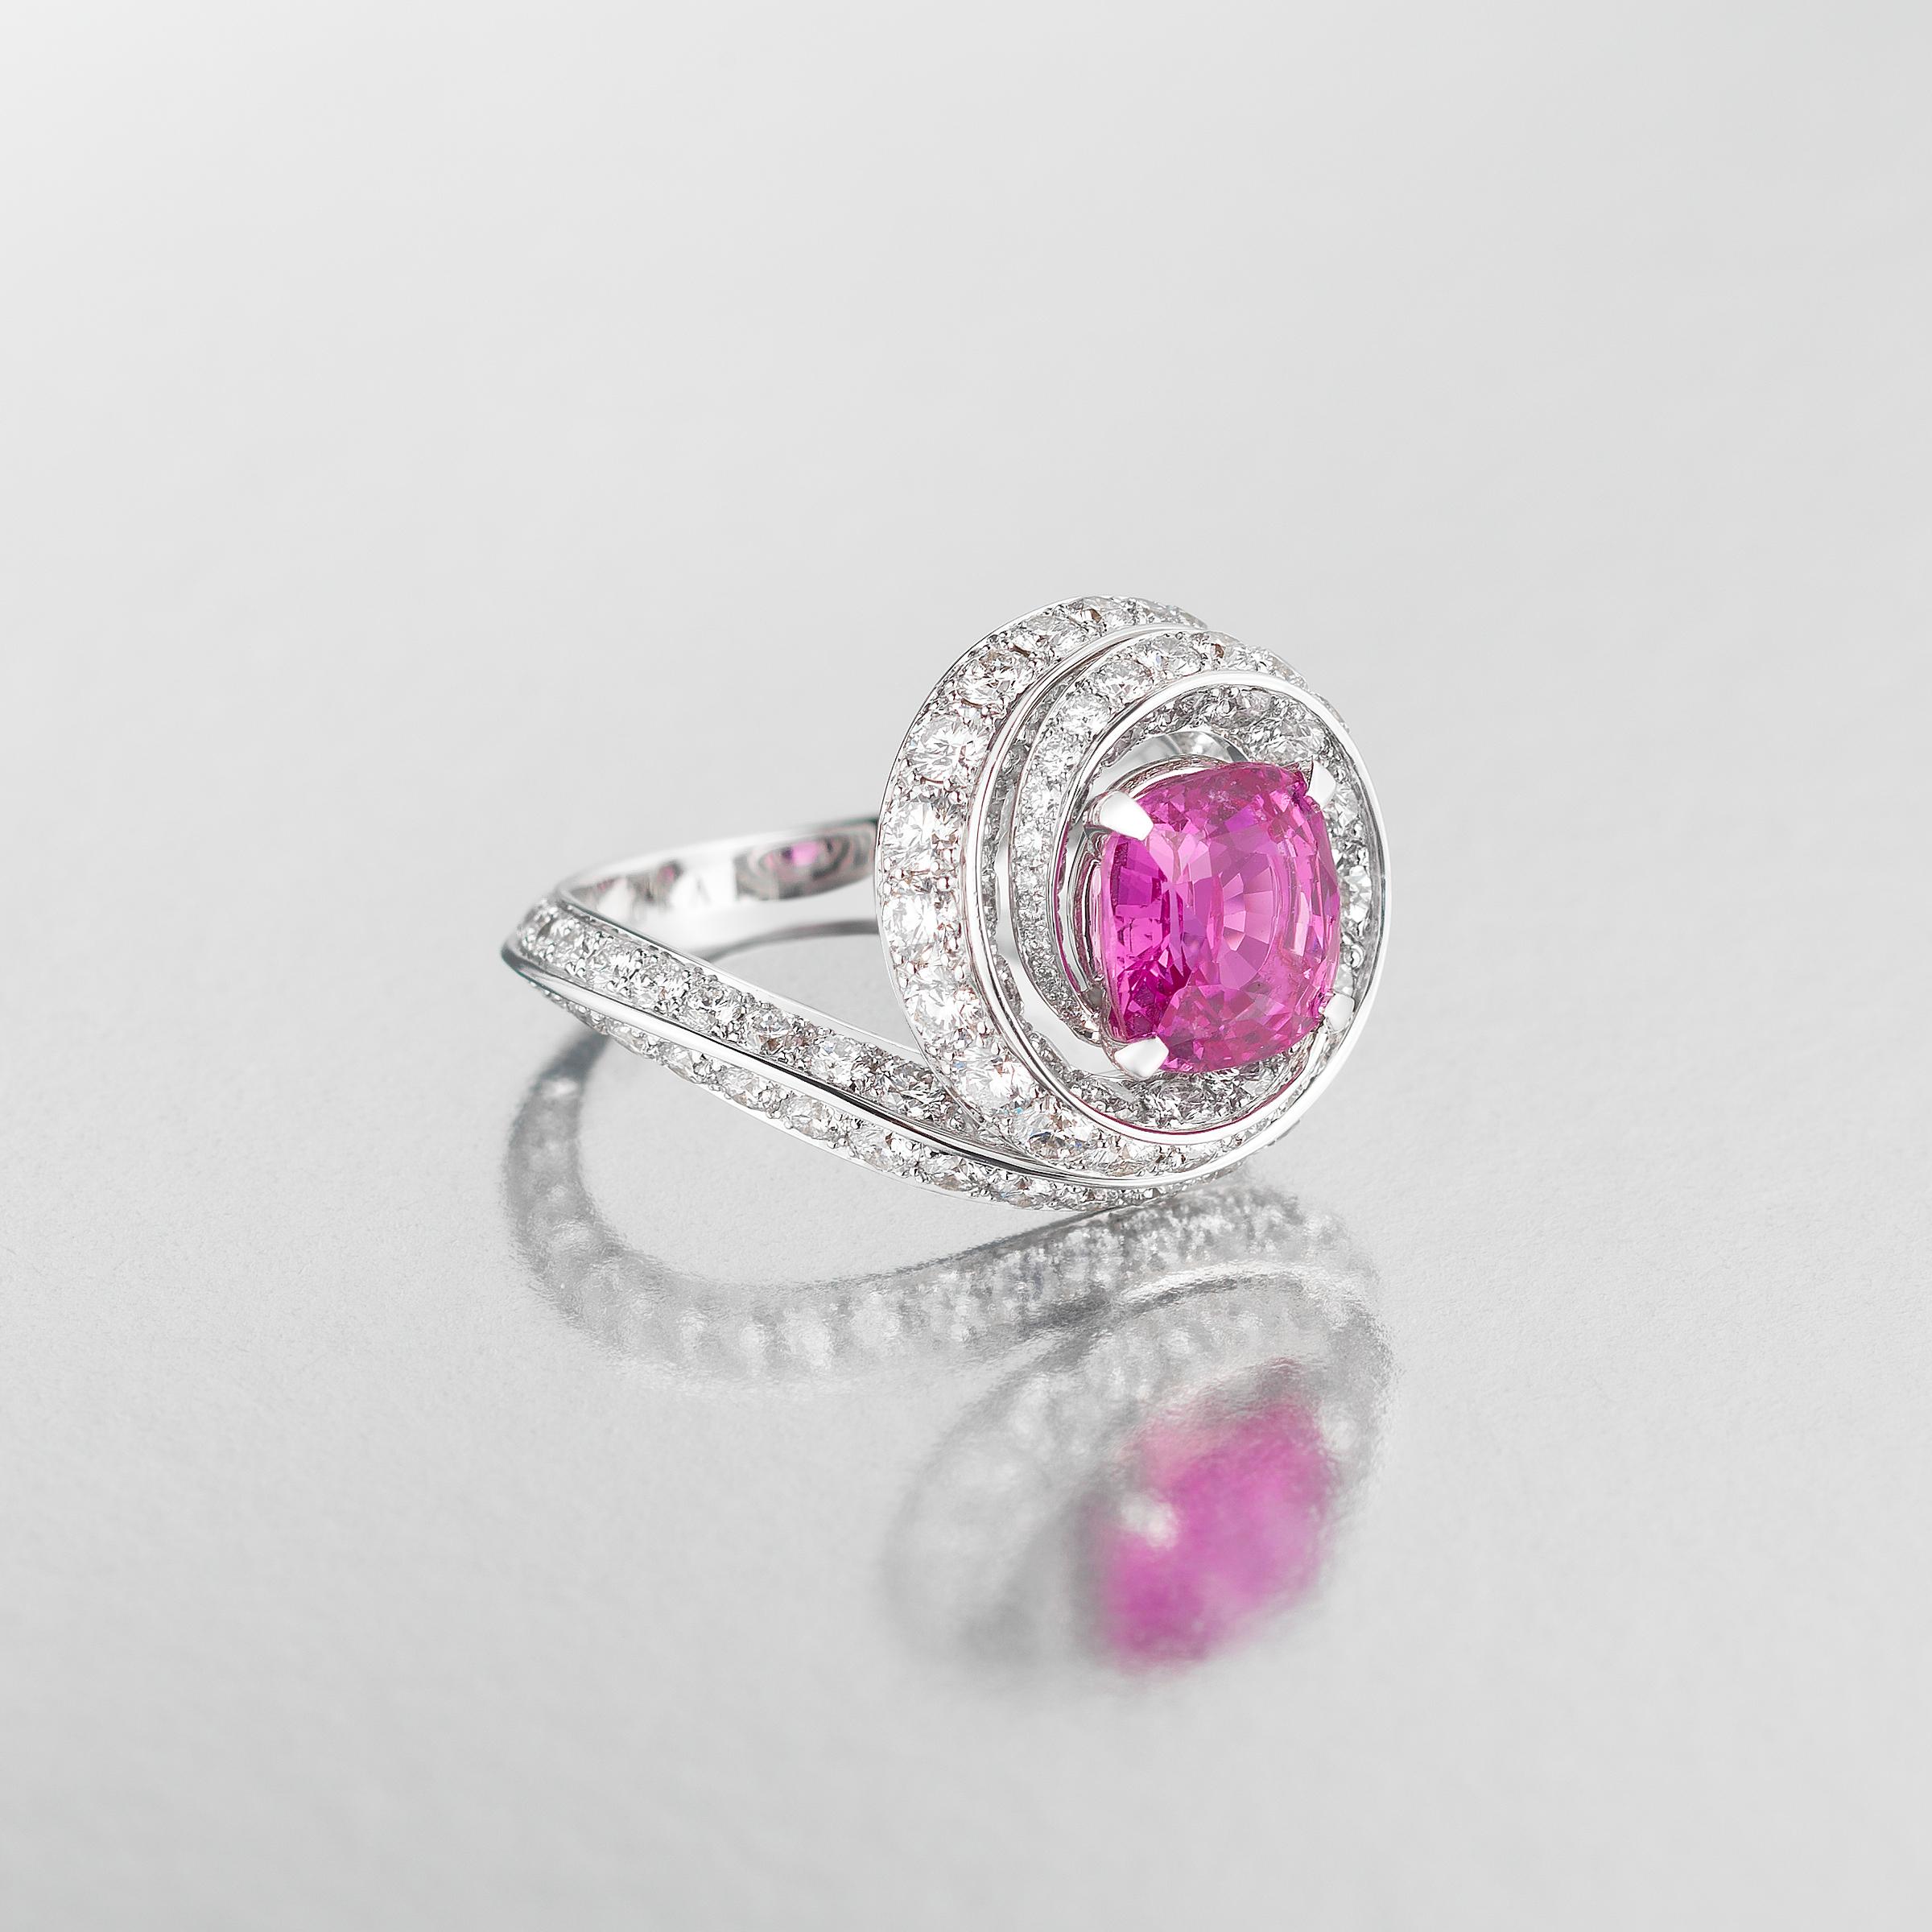 Exquisite one-of-a-kind pink sapphire and diamond ring by the famous Graff of London set in 18 karat white gold. The ring showcases at its center large, 3.13 carat, cushion-cut natural sapphire of vivid pink hue. A masterfully crafted double-layer